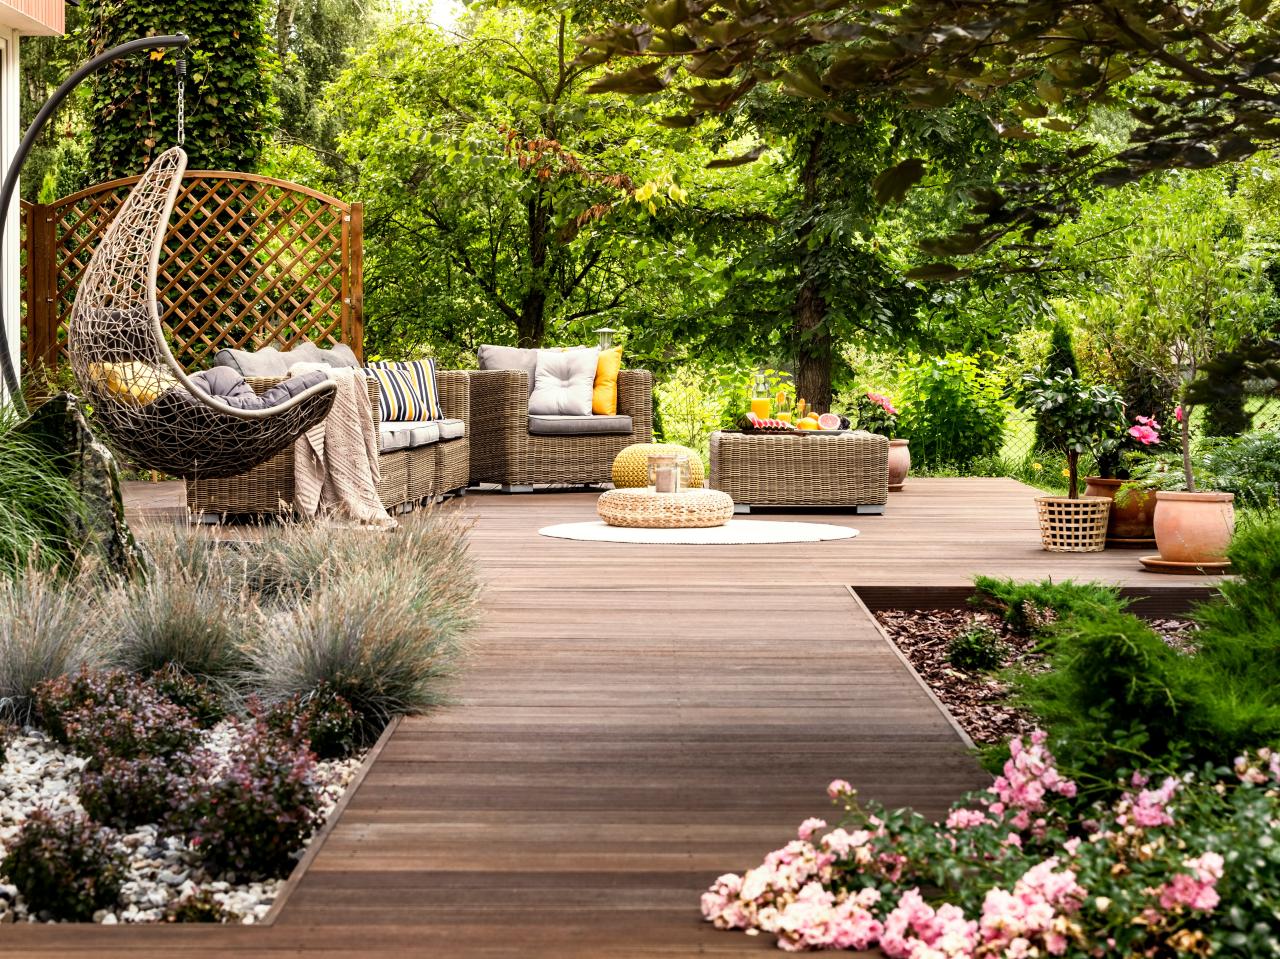 46 Backyard Ideas That Will Keep You Outside All Summer Long |  Architectural Digest | Architectural Digest